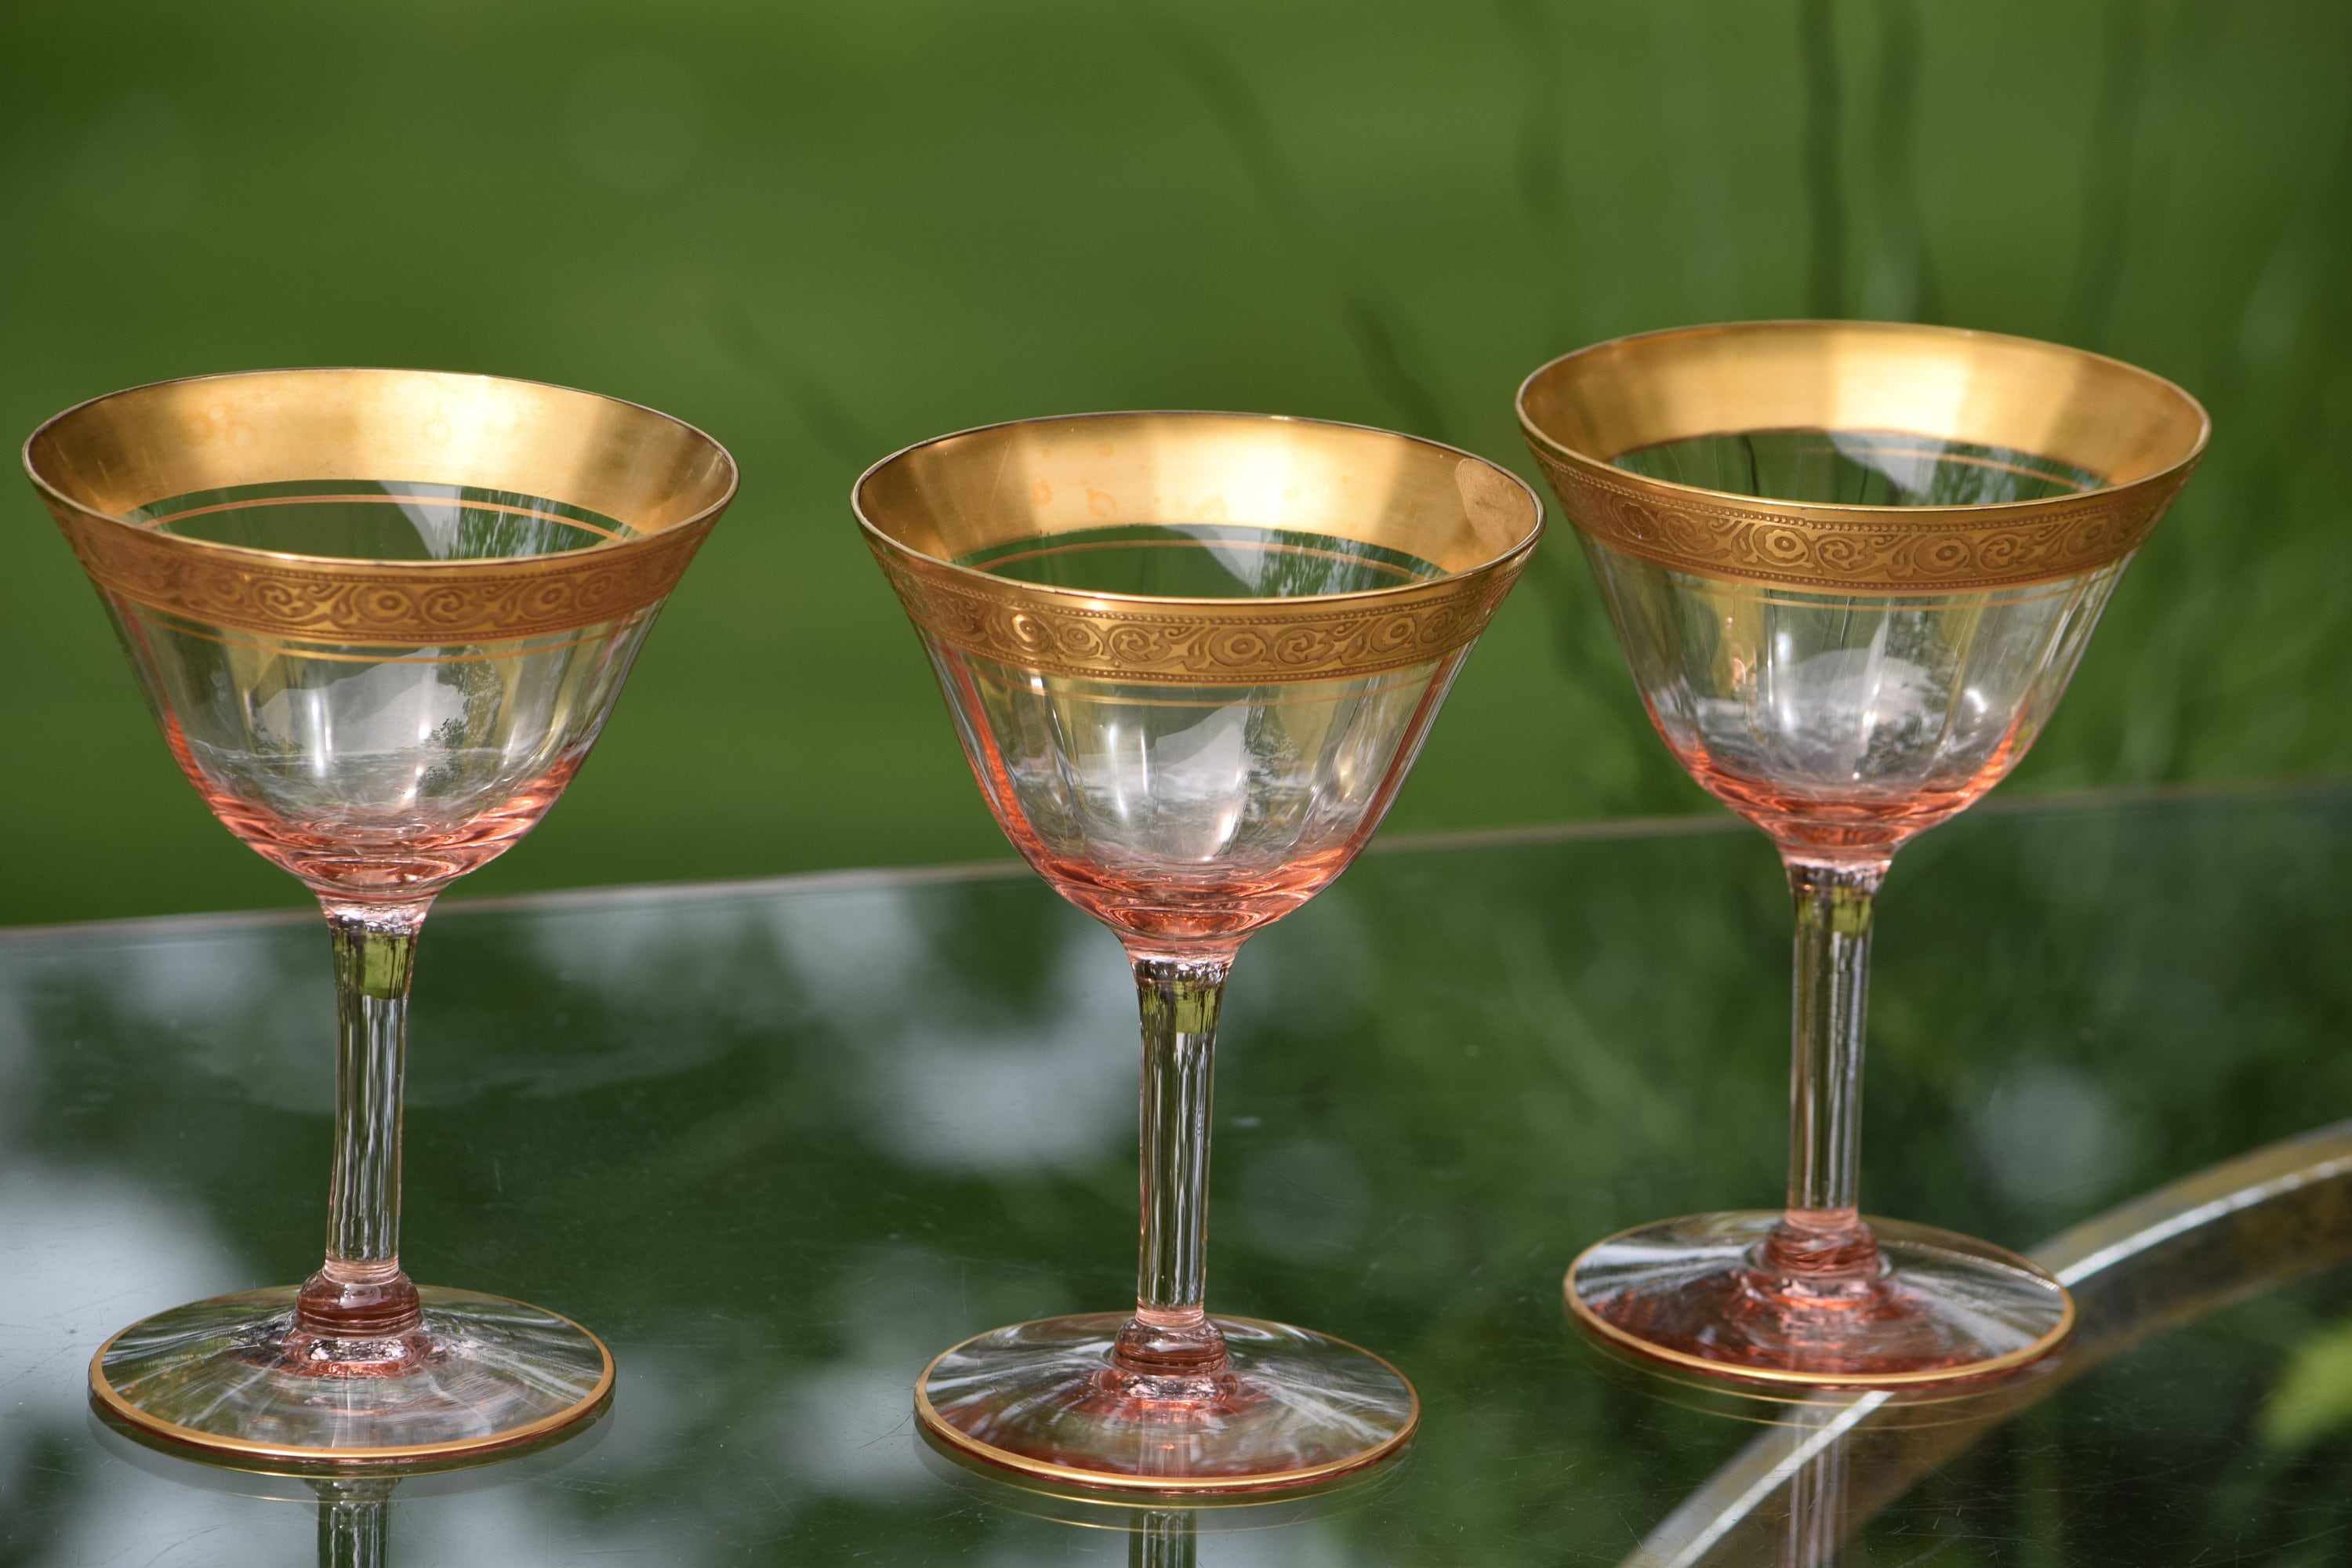 Set of 12 champagne glasses, first half of the 19th century - Ref.93874